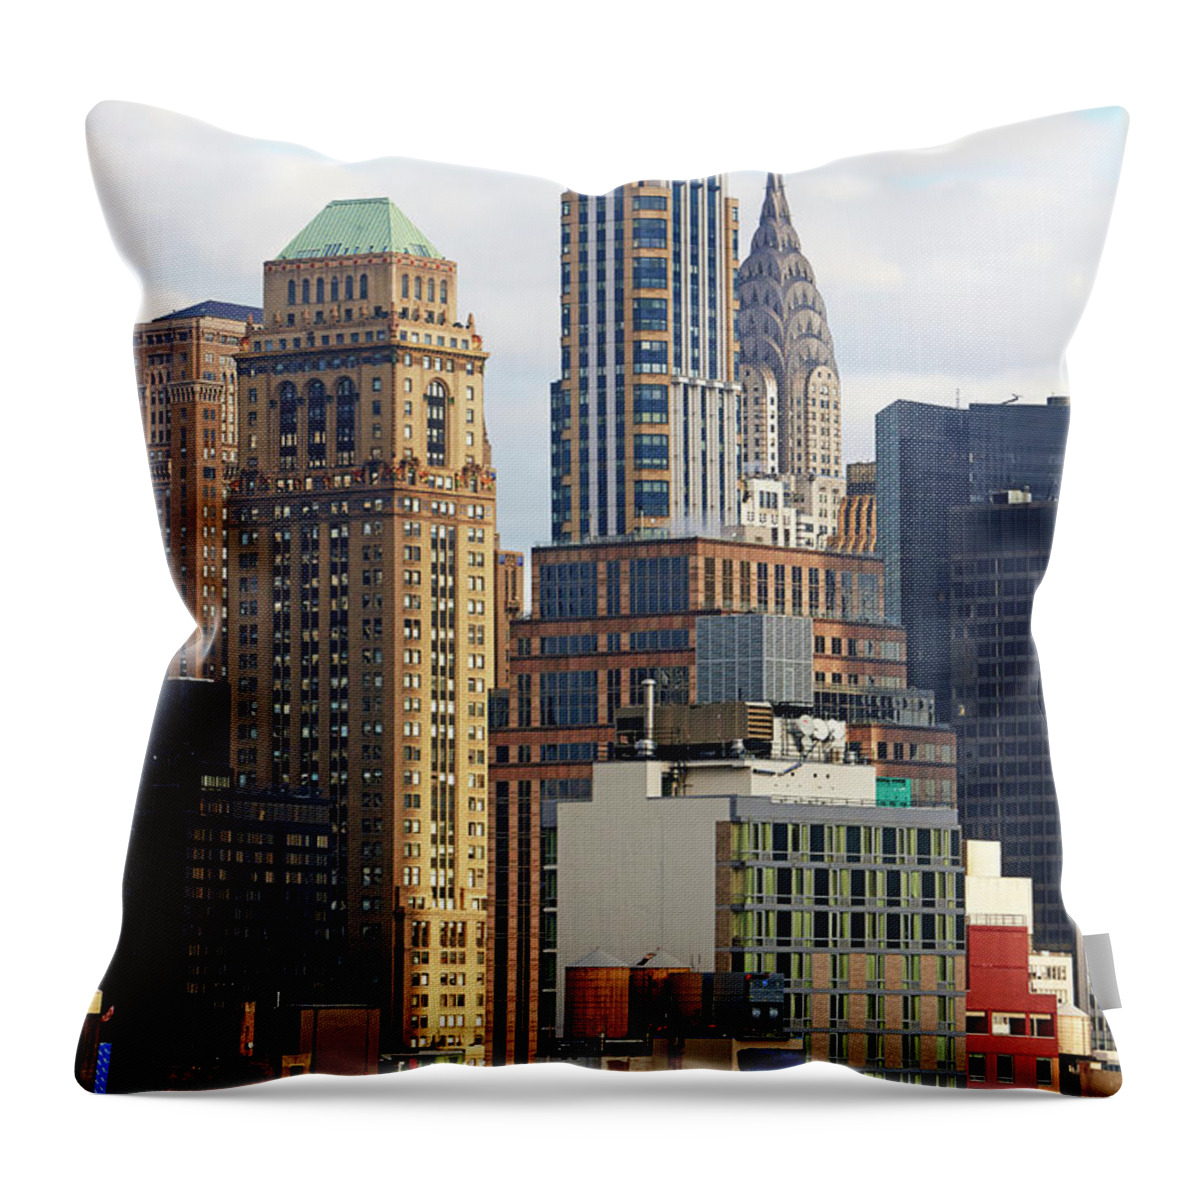 Shadow Throw Pillow featuring the photograph Elevated View Of Midtown Manhattan #1 by Allan Baxter